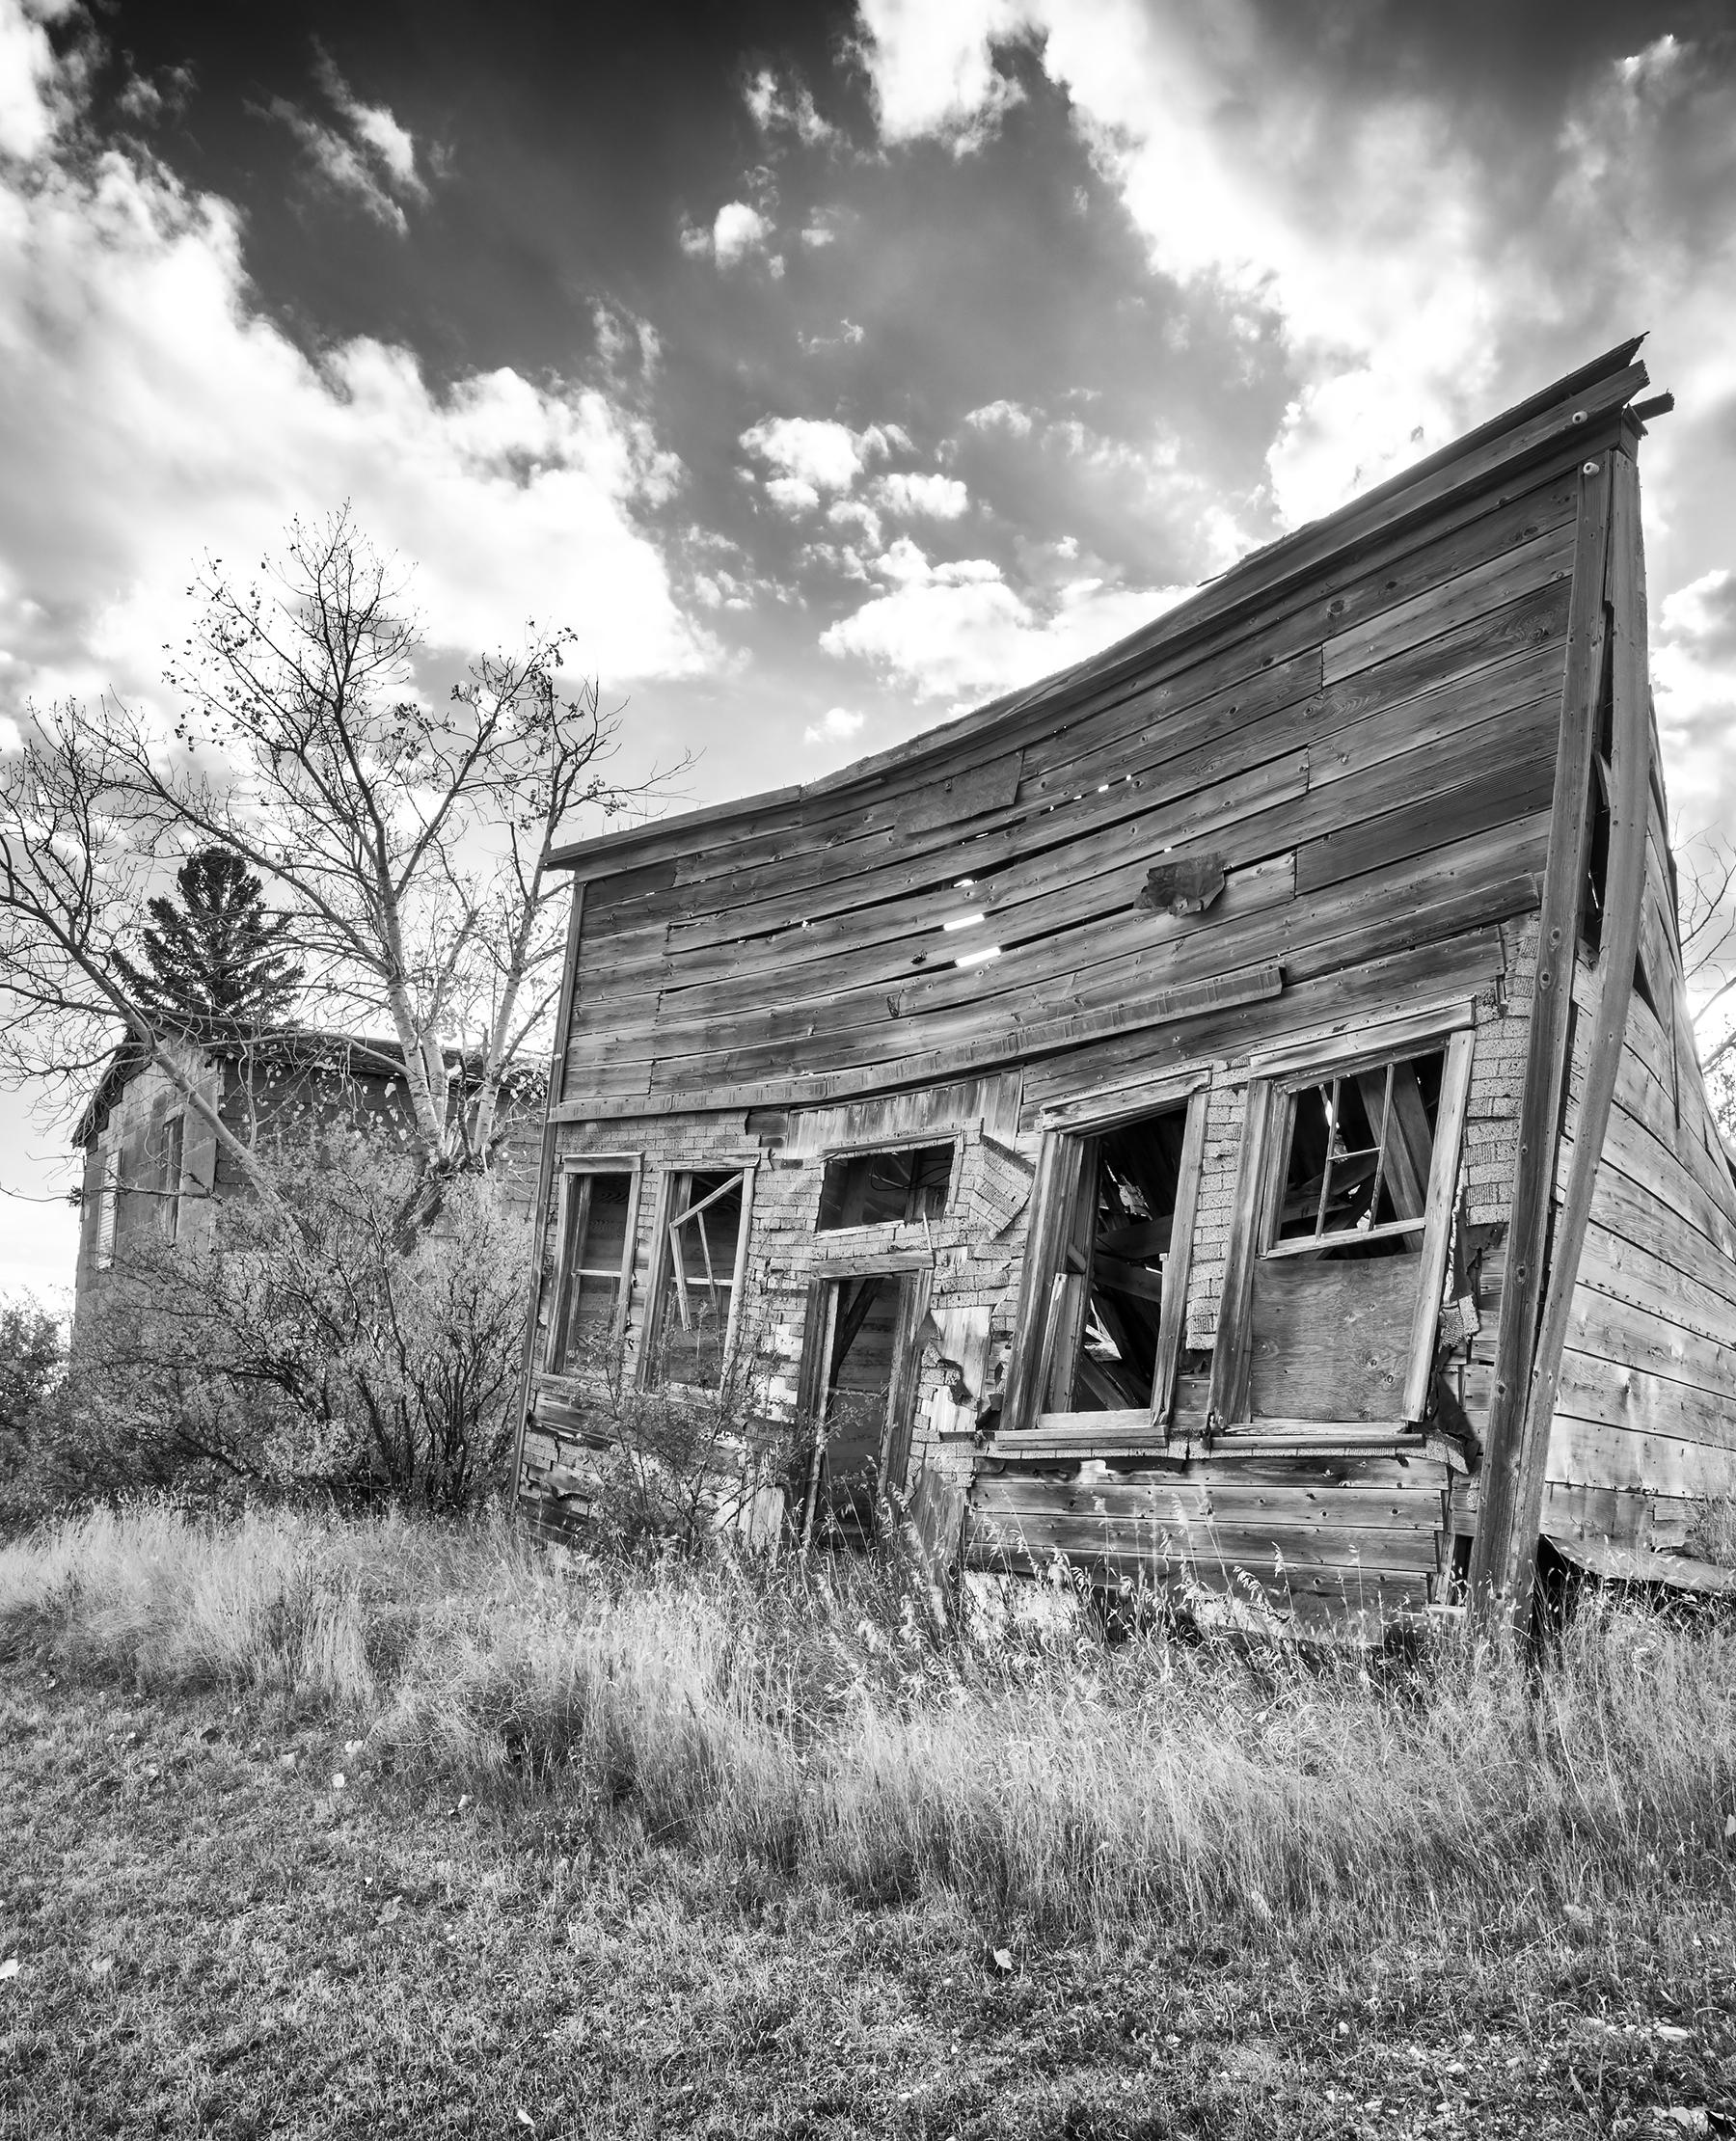 Rebecca Skinner’s “Alkabo I” is a 24 x 36 inch black and white photograph captured in a North Dakota ghost town. Dramatic sky frames a weathered structure in this beautiful contemporary landscape. The frameless metal print has a satin finish and is